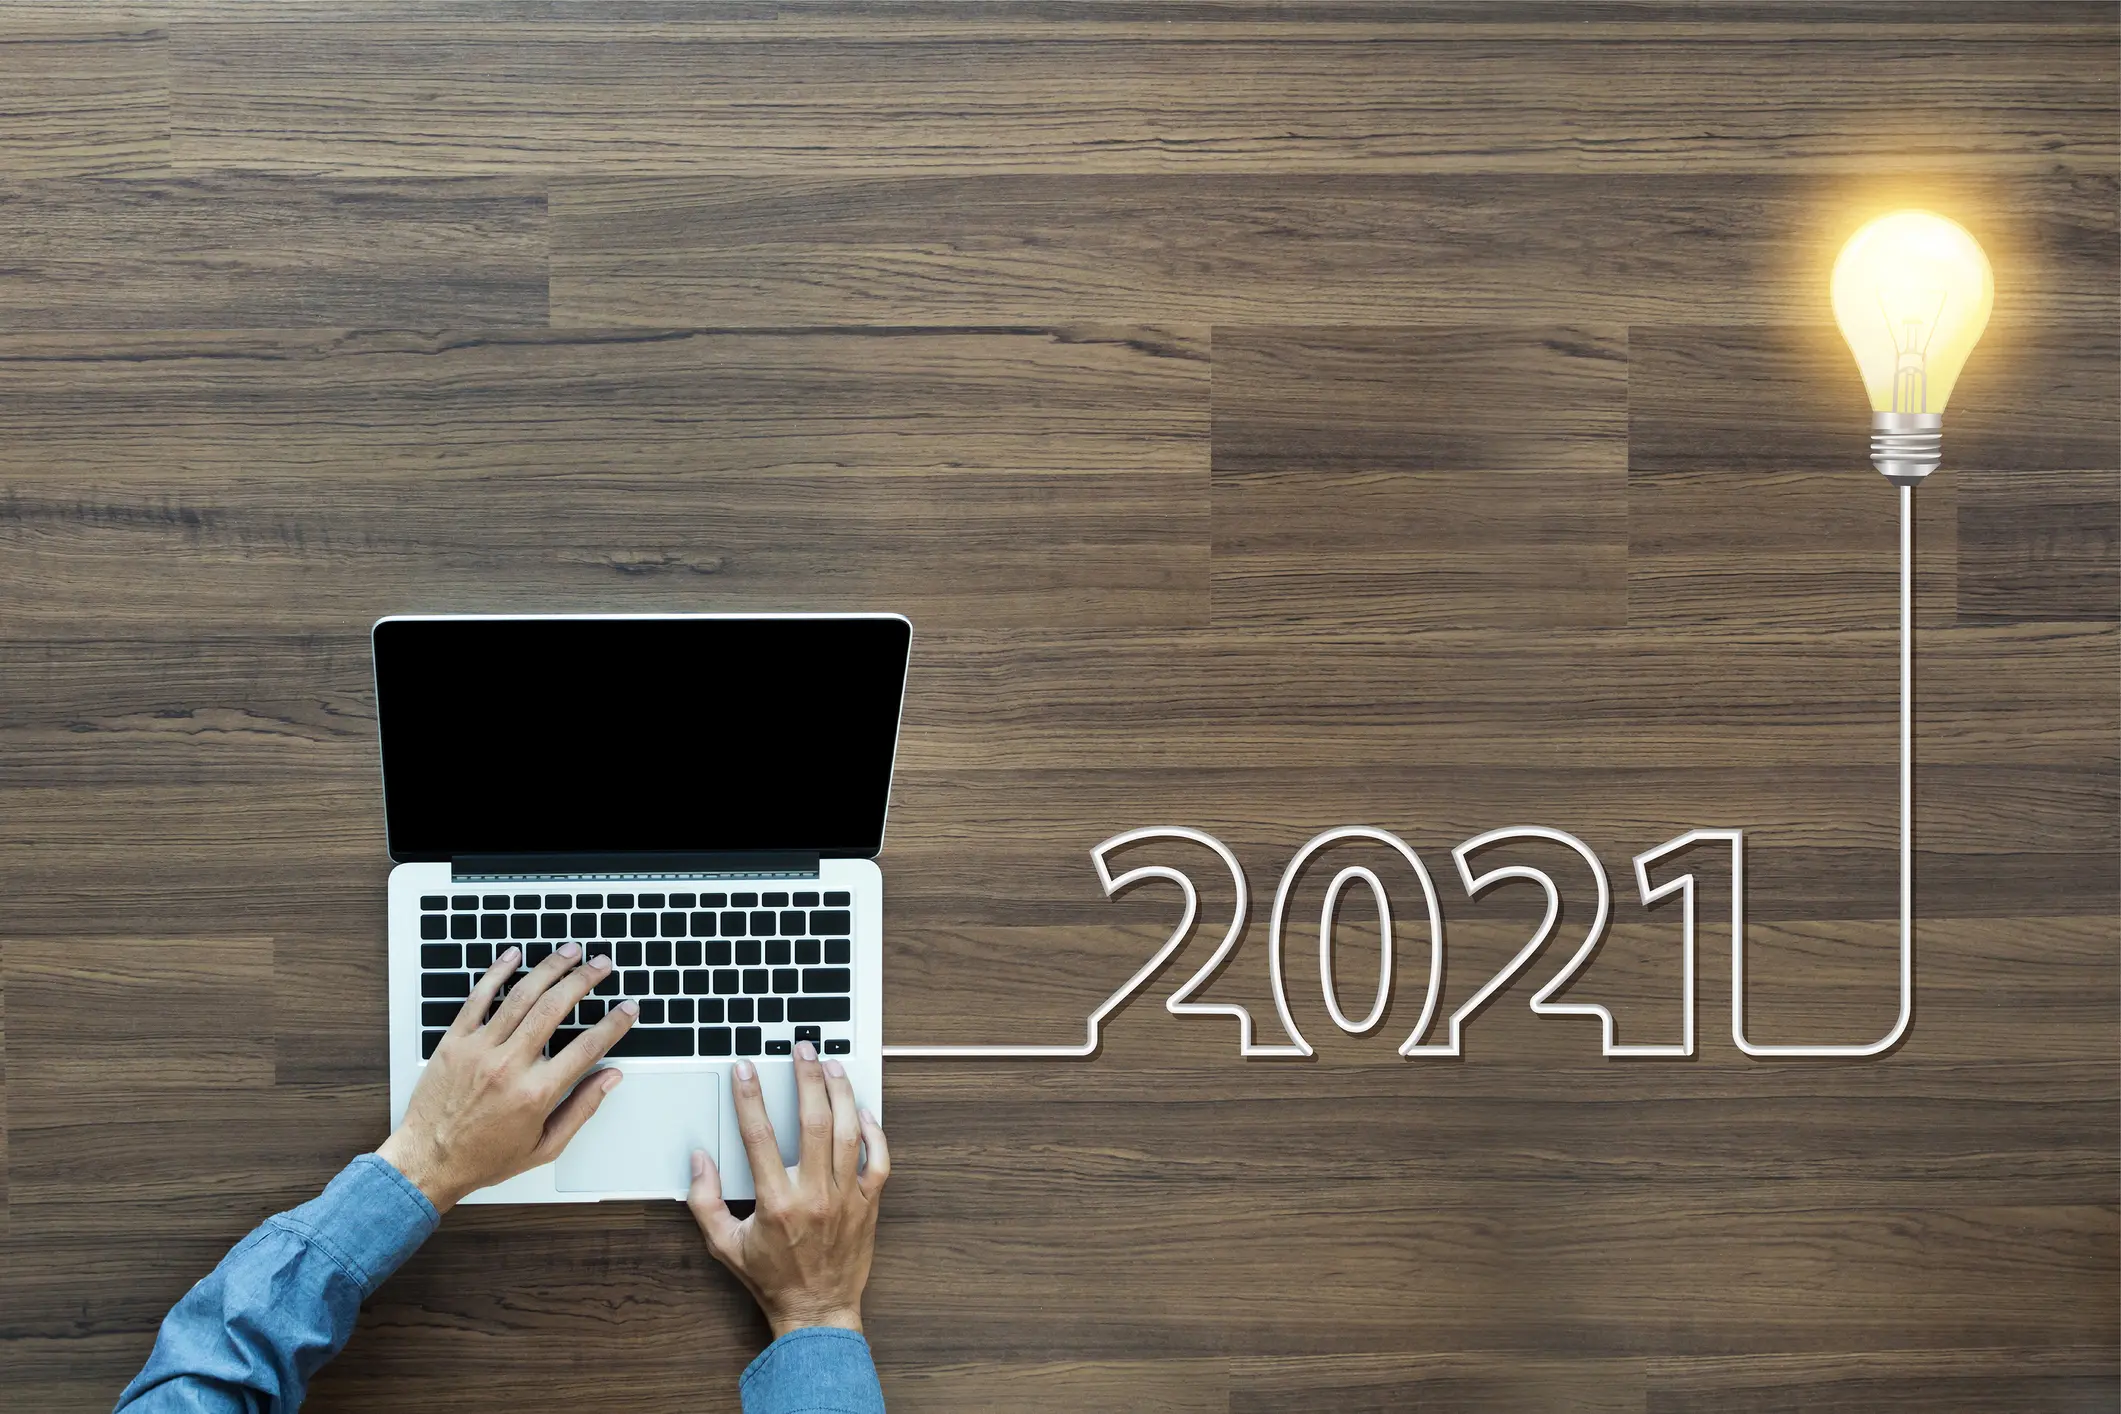 Welcome to the Post-2020 Sales Training Landscape